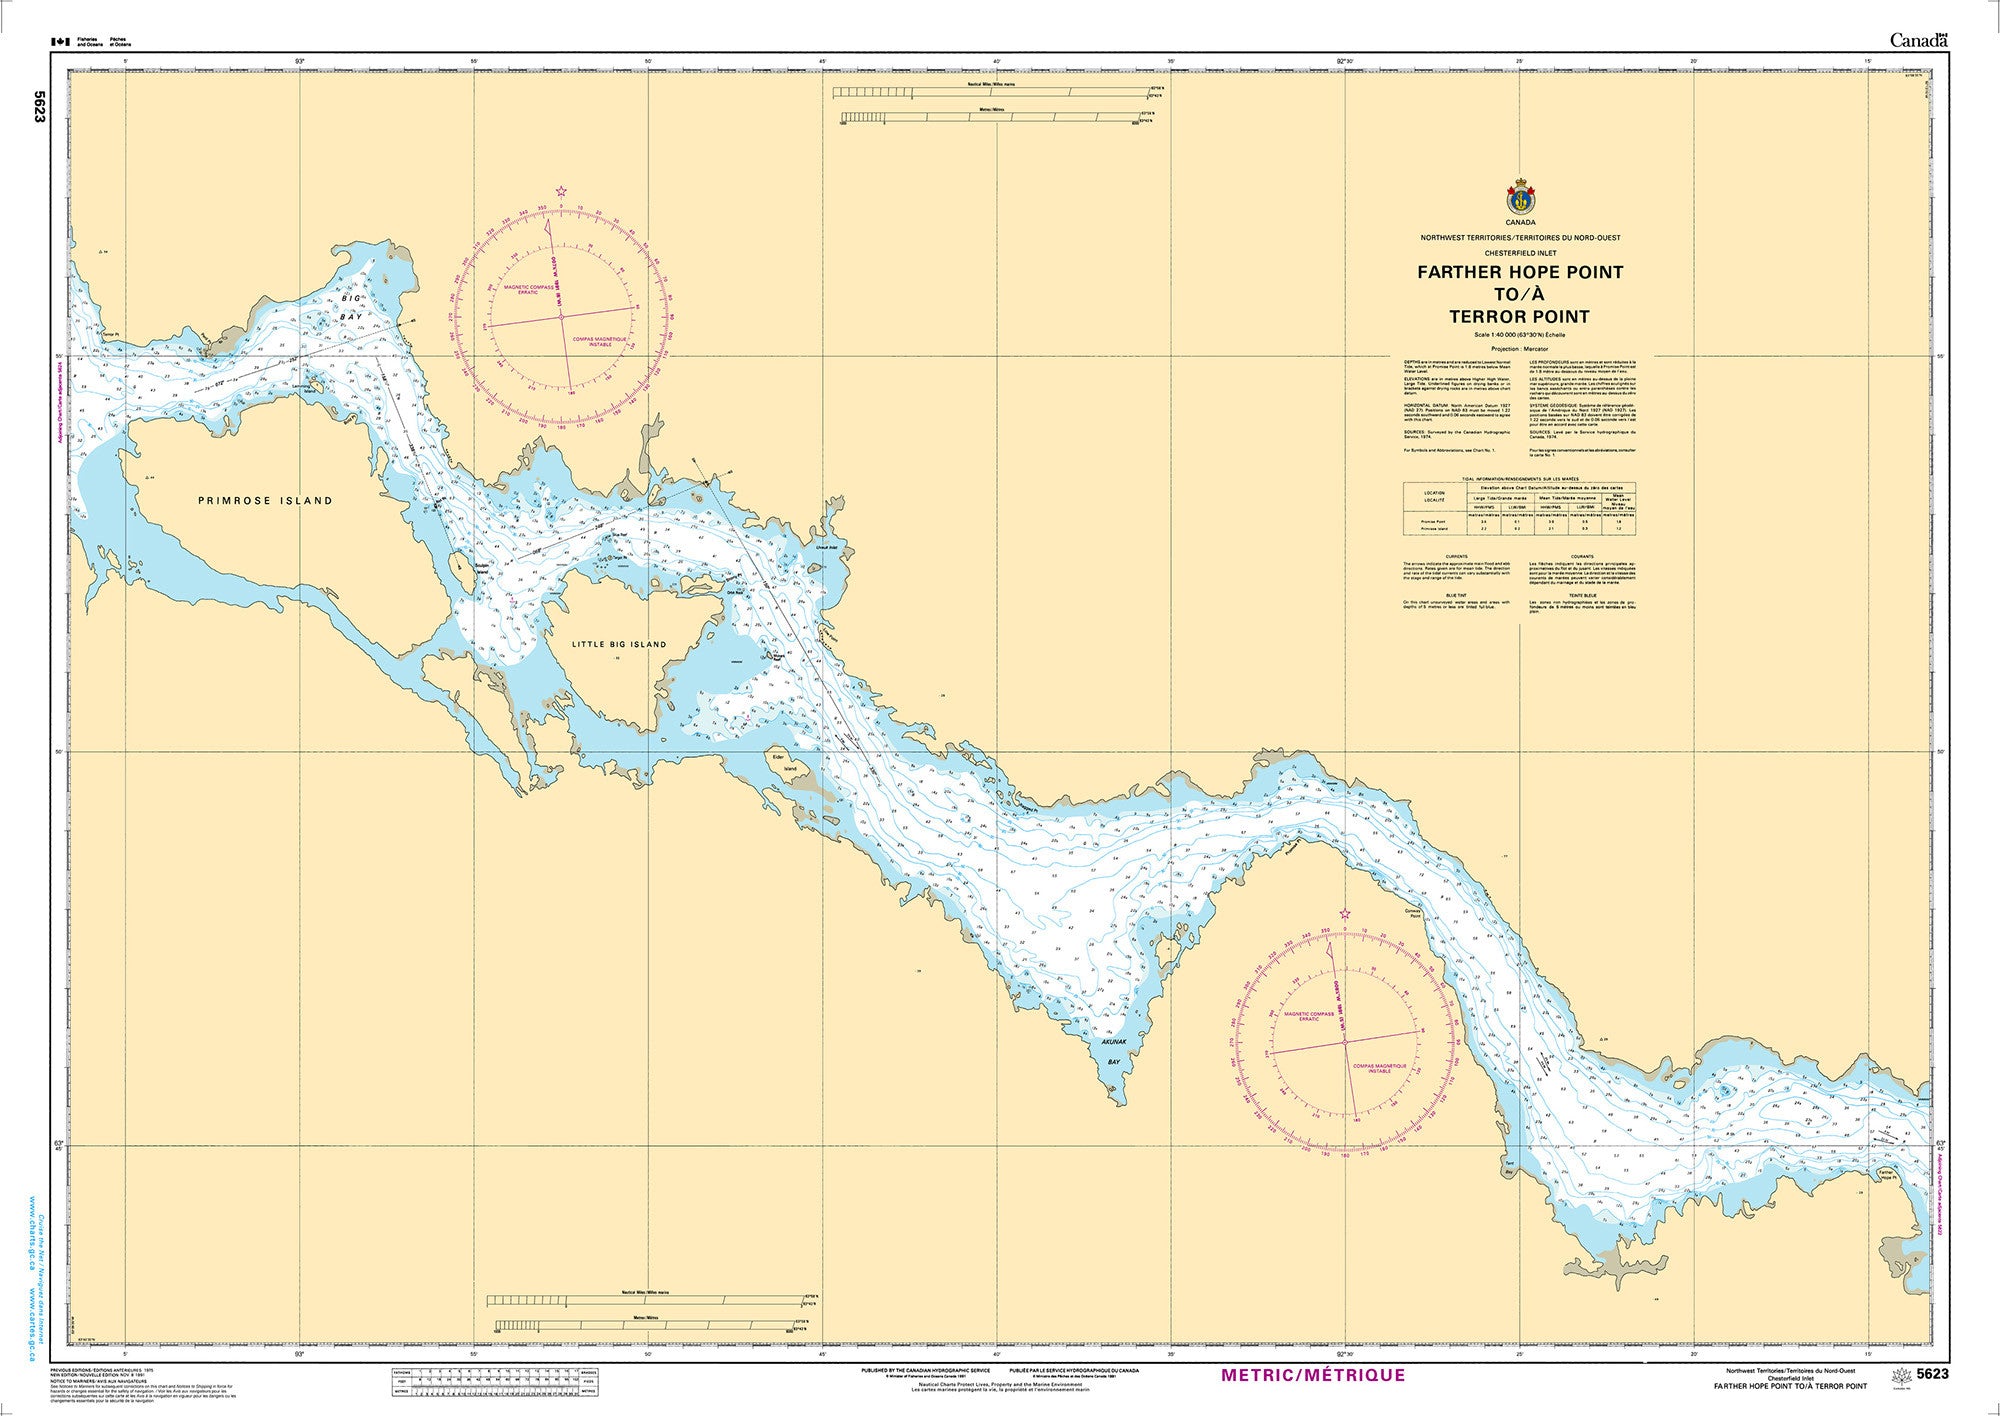 Canadian Hydrographic Service Nautical Chart CHS5623: Farther Hope Point to/à Terror Point